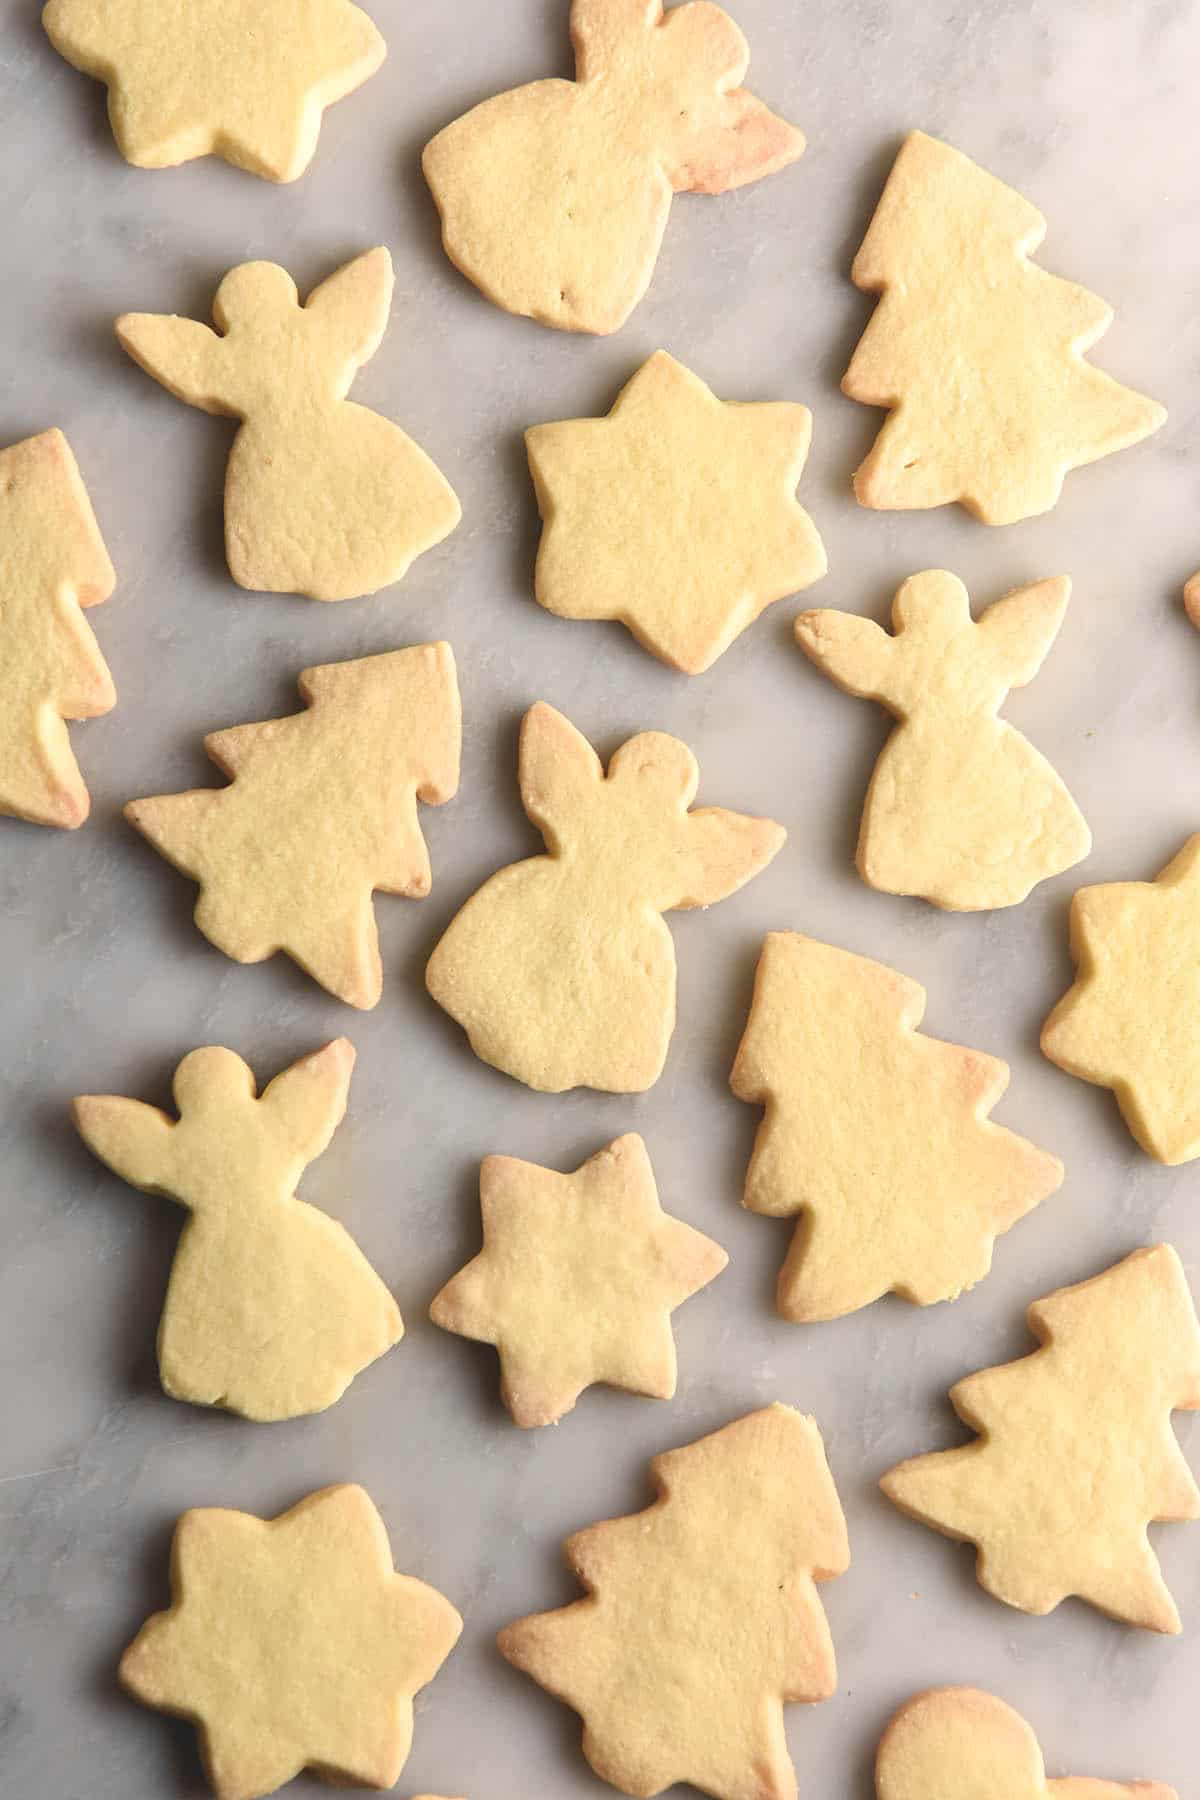 An aerial view of gluten free shortbread cut into various festive shapes - Christmas trees, angels and stars. The shortbread sit atop a white marble table.